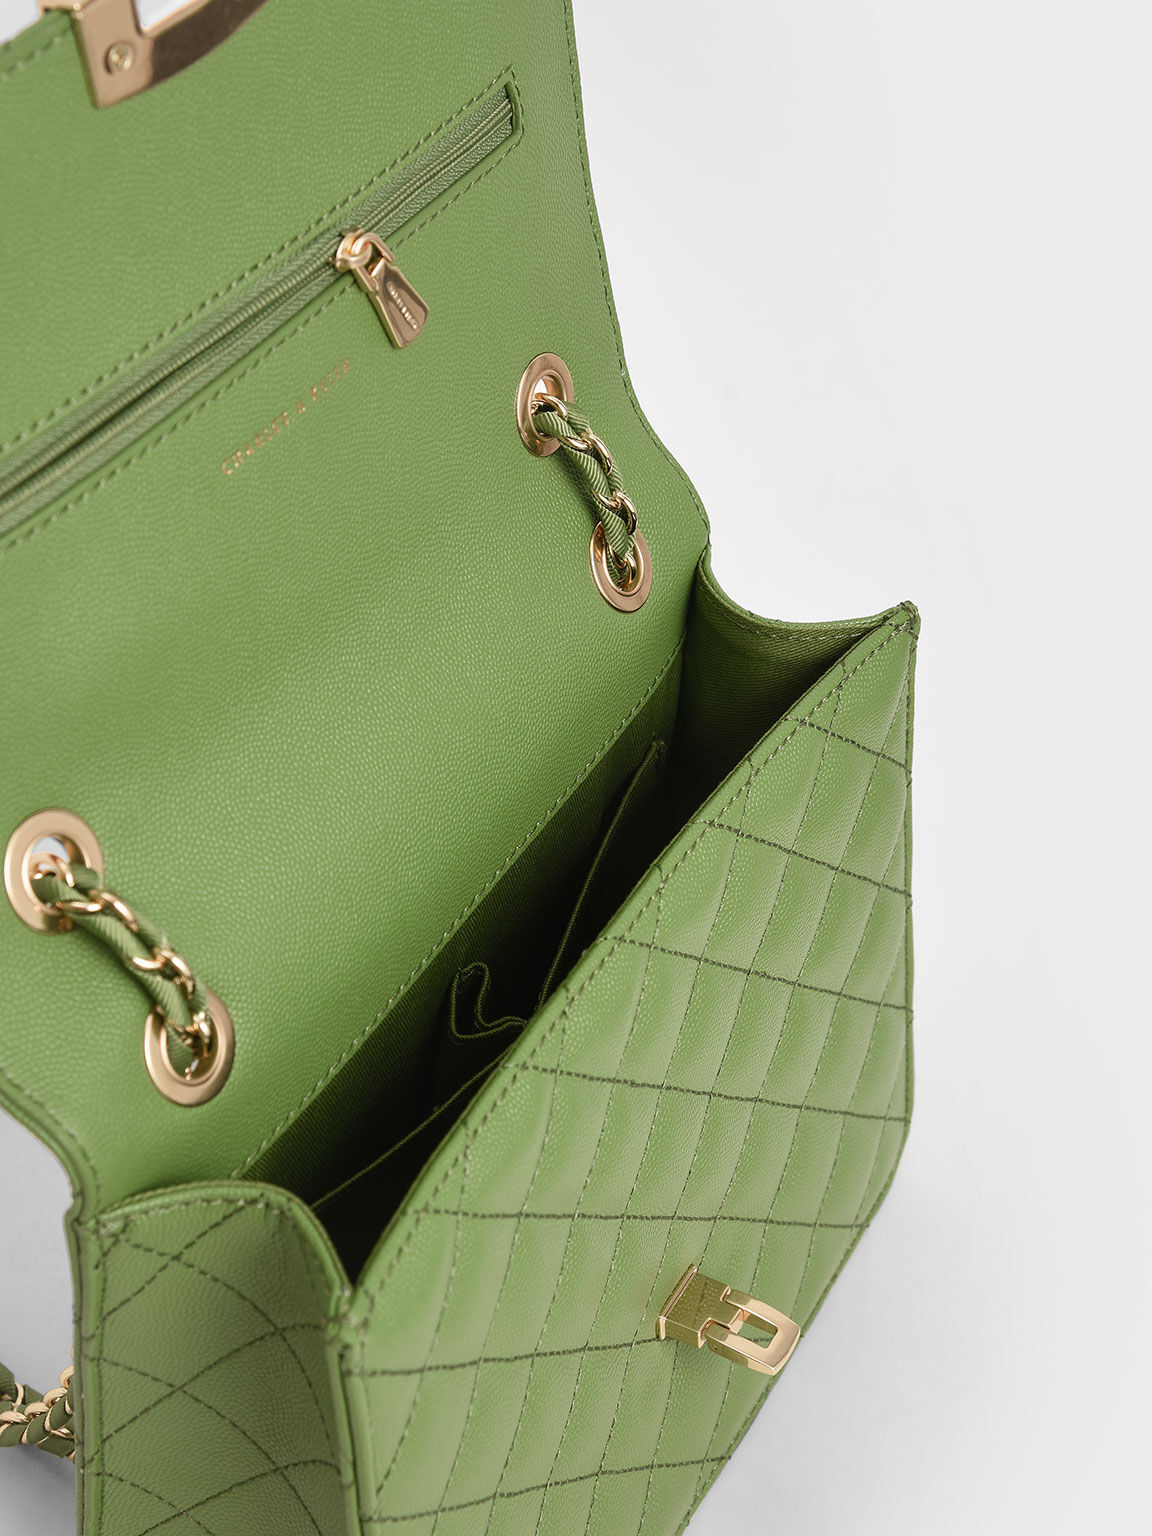 Clutch Quilted Chain Strap, Green, hi-res